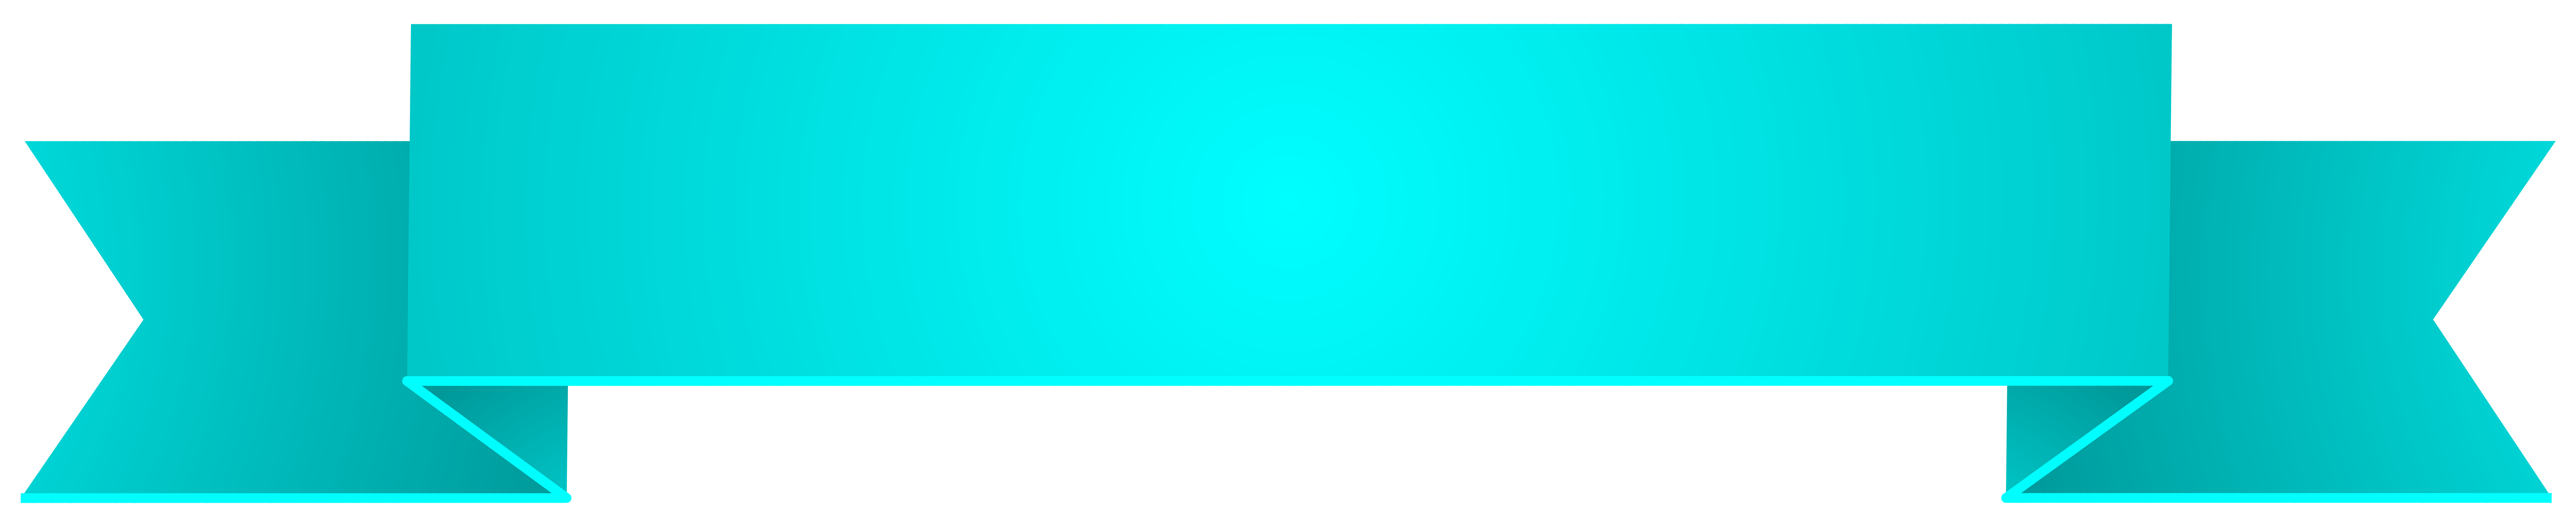 clipart banner teal